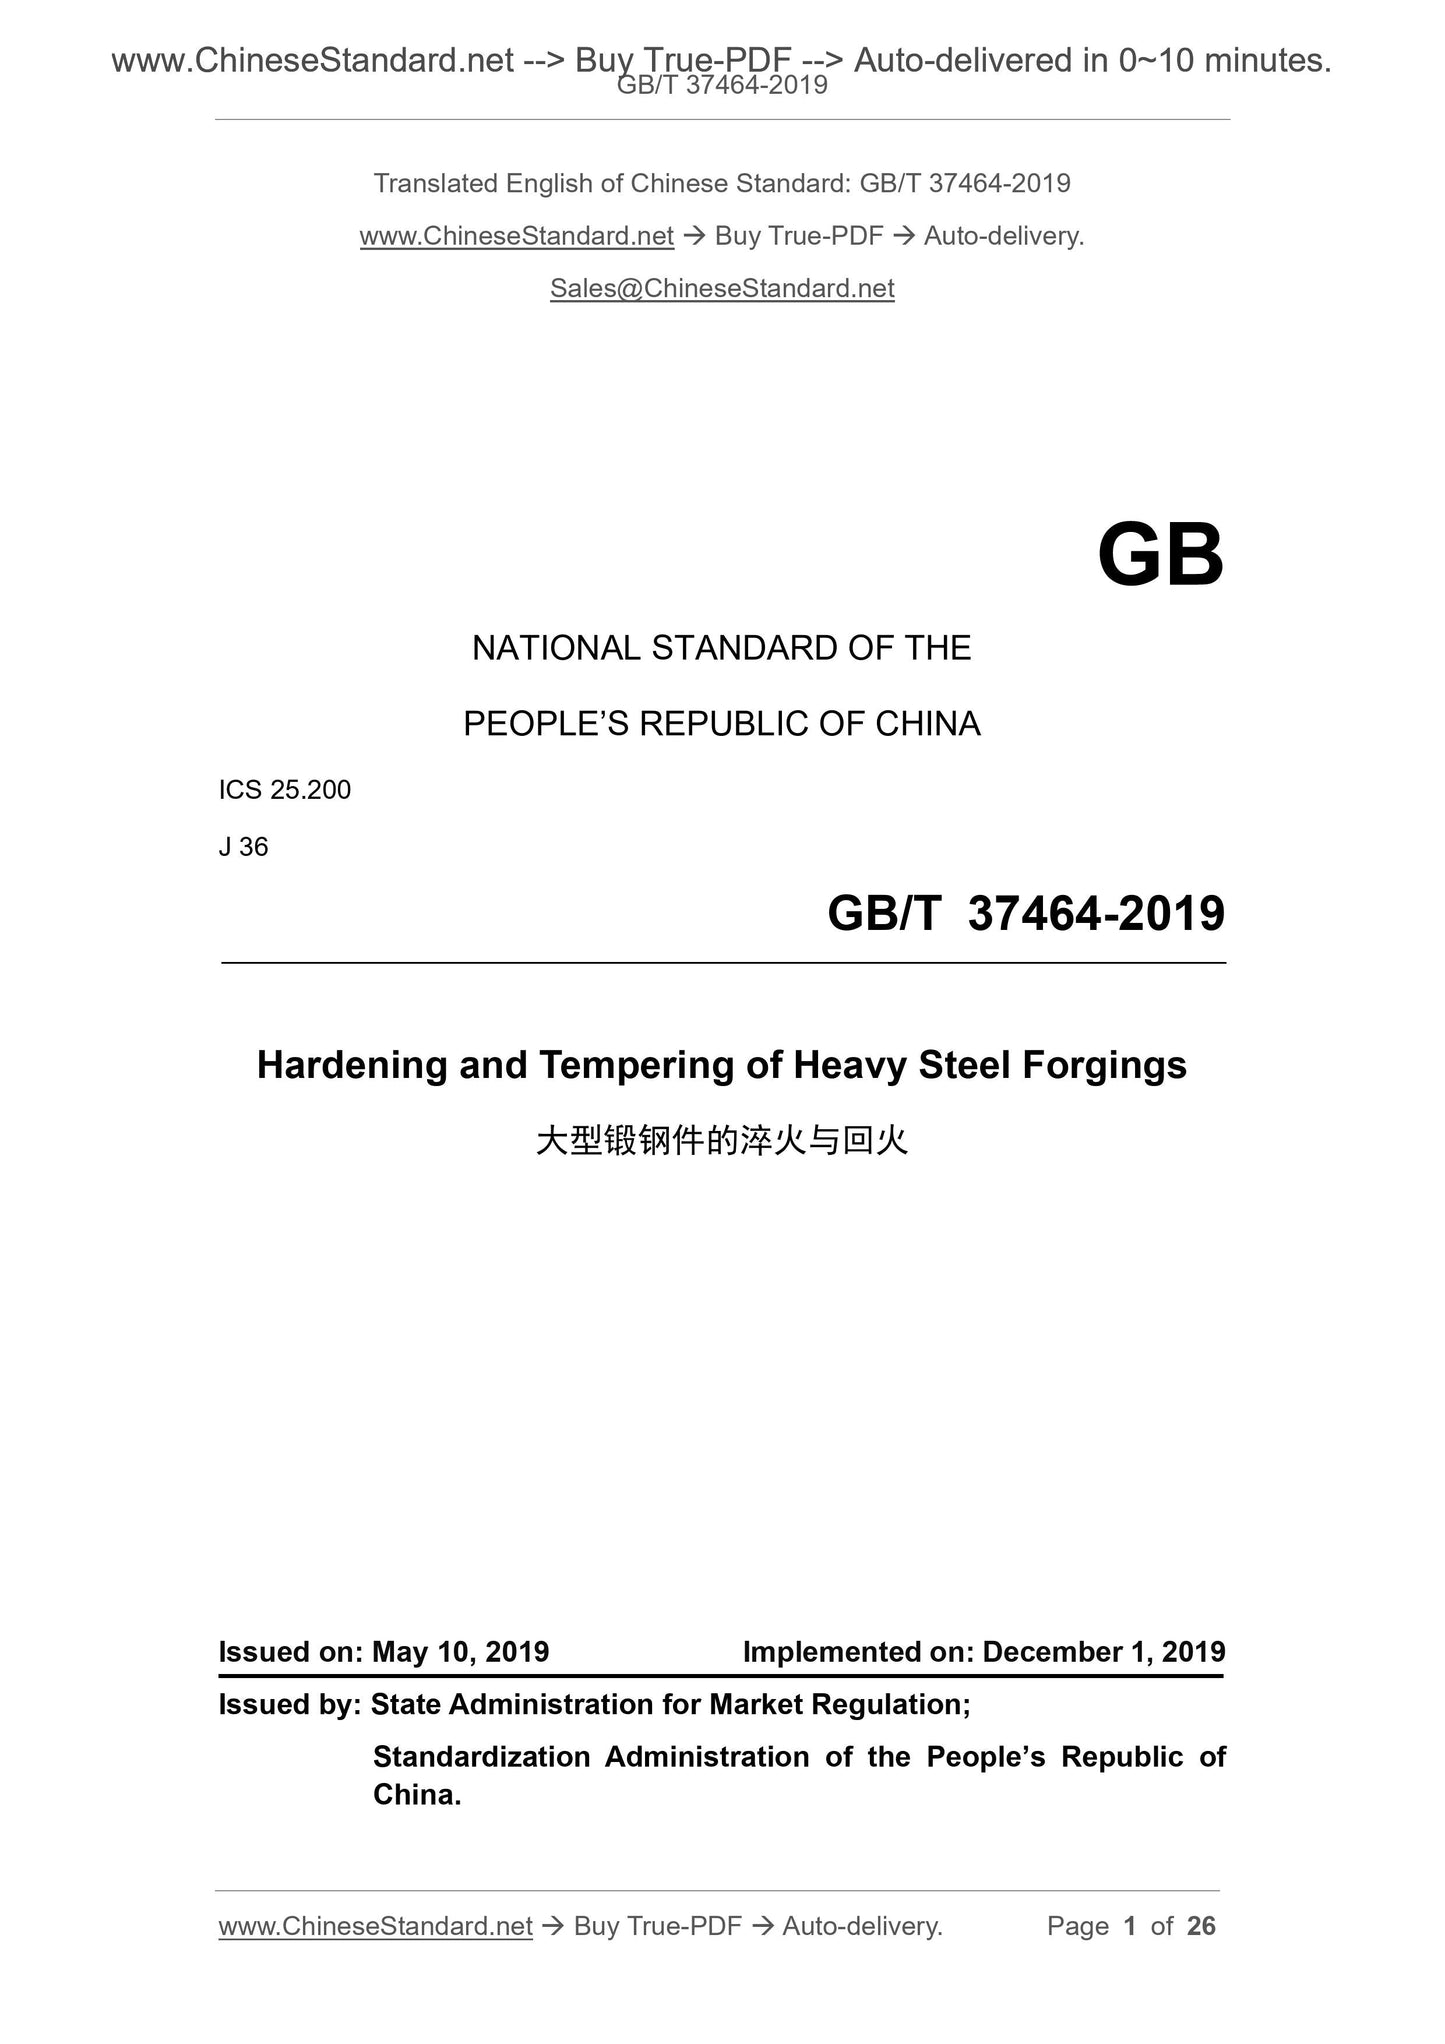 GB/T 37464-2019 Page 1